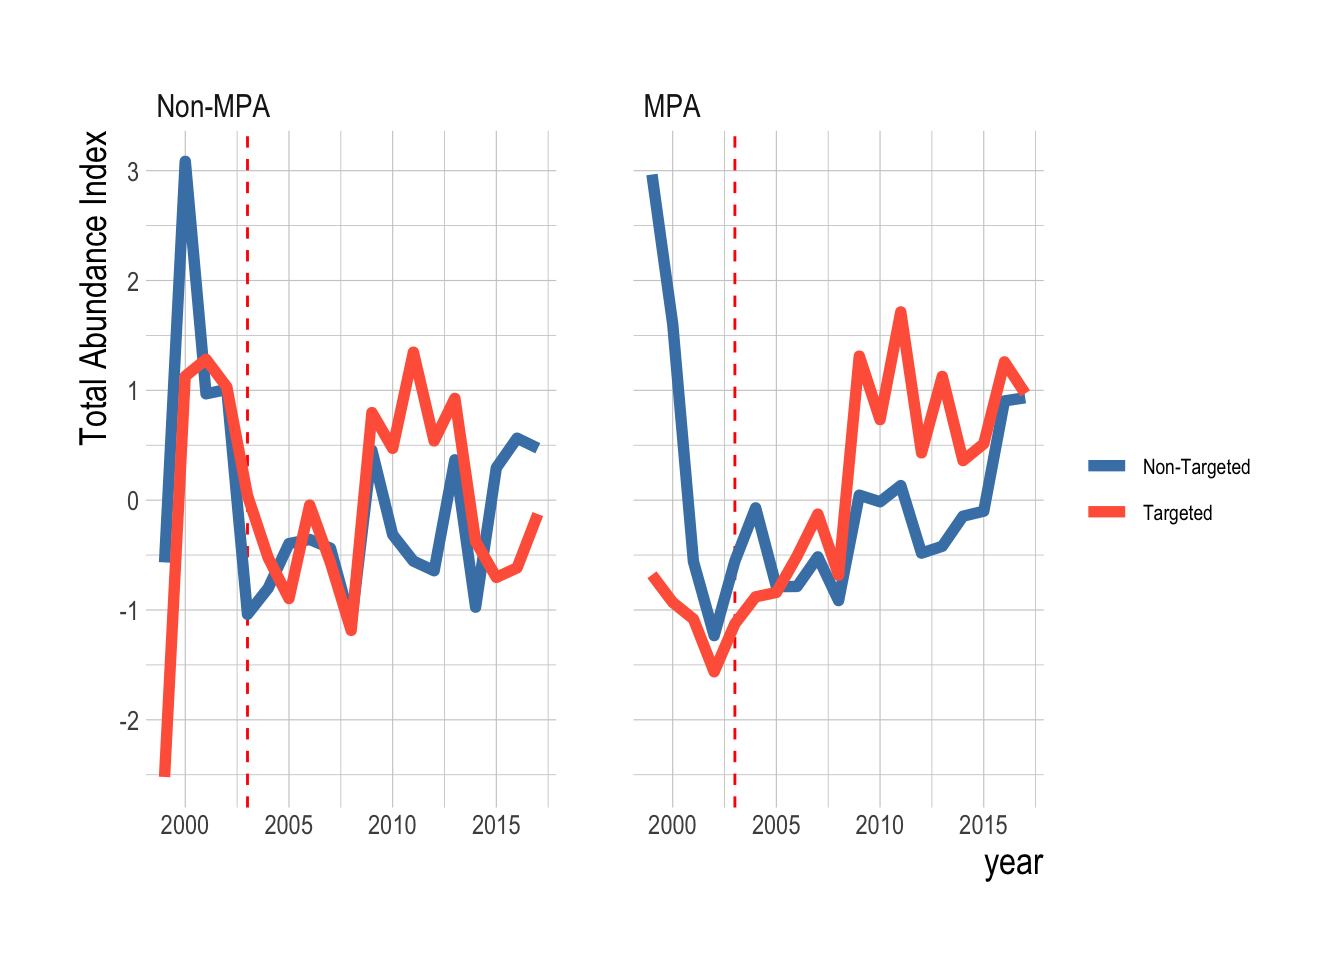 Trends in total biomass density inside and outside of eventual MPAs for targeted and non-targeted fishes. Red dashed line indicates MPA implementation year